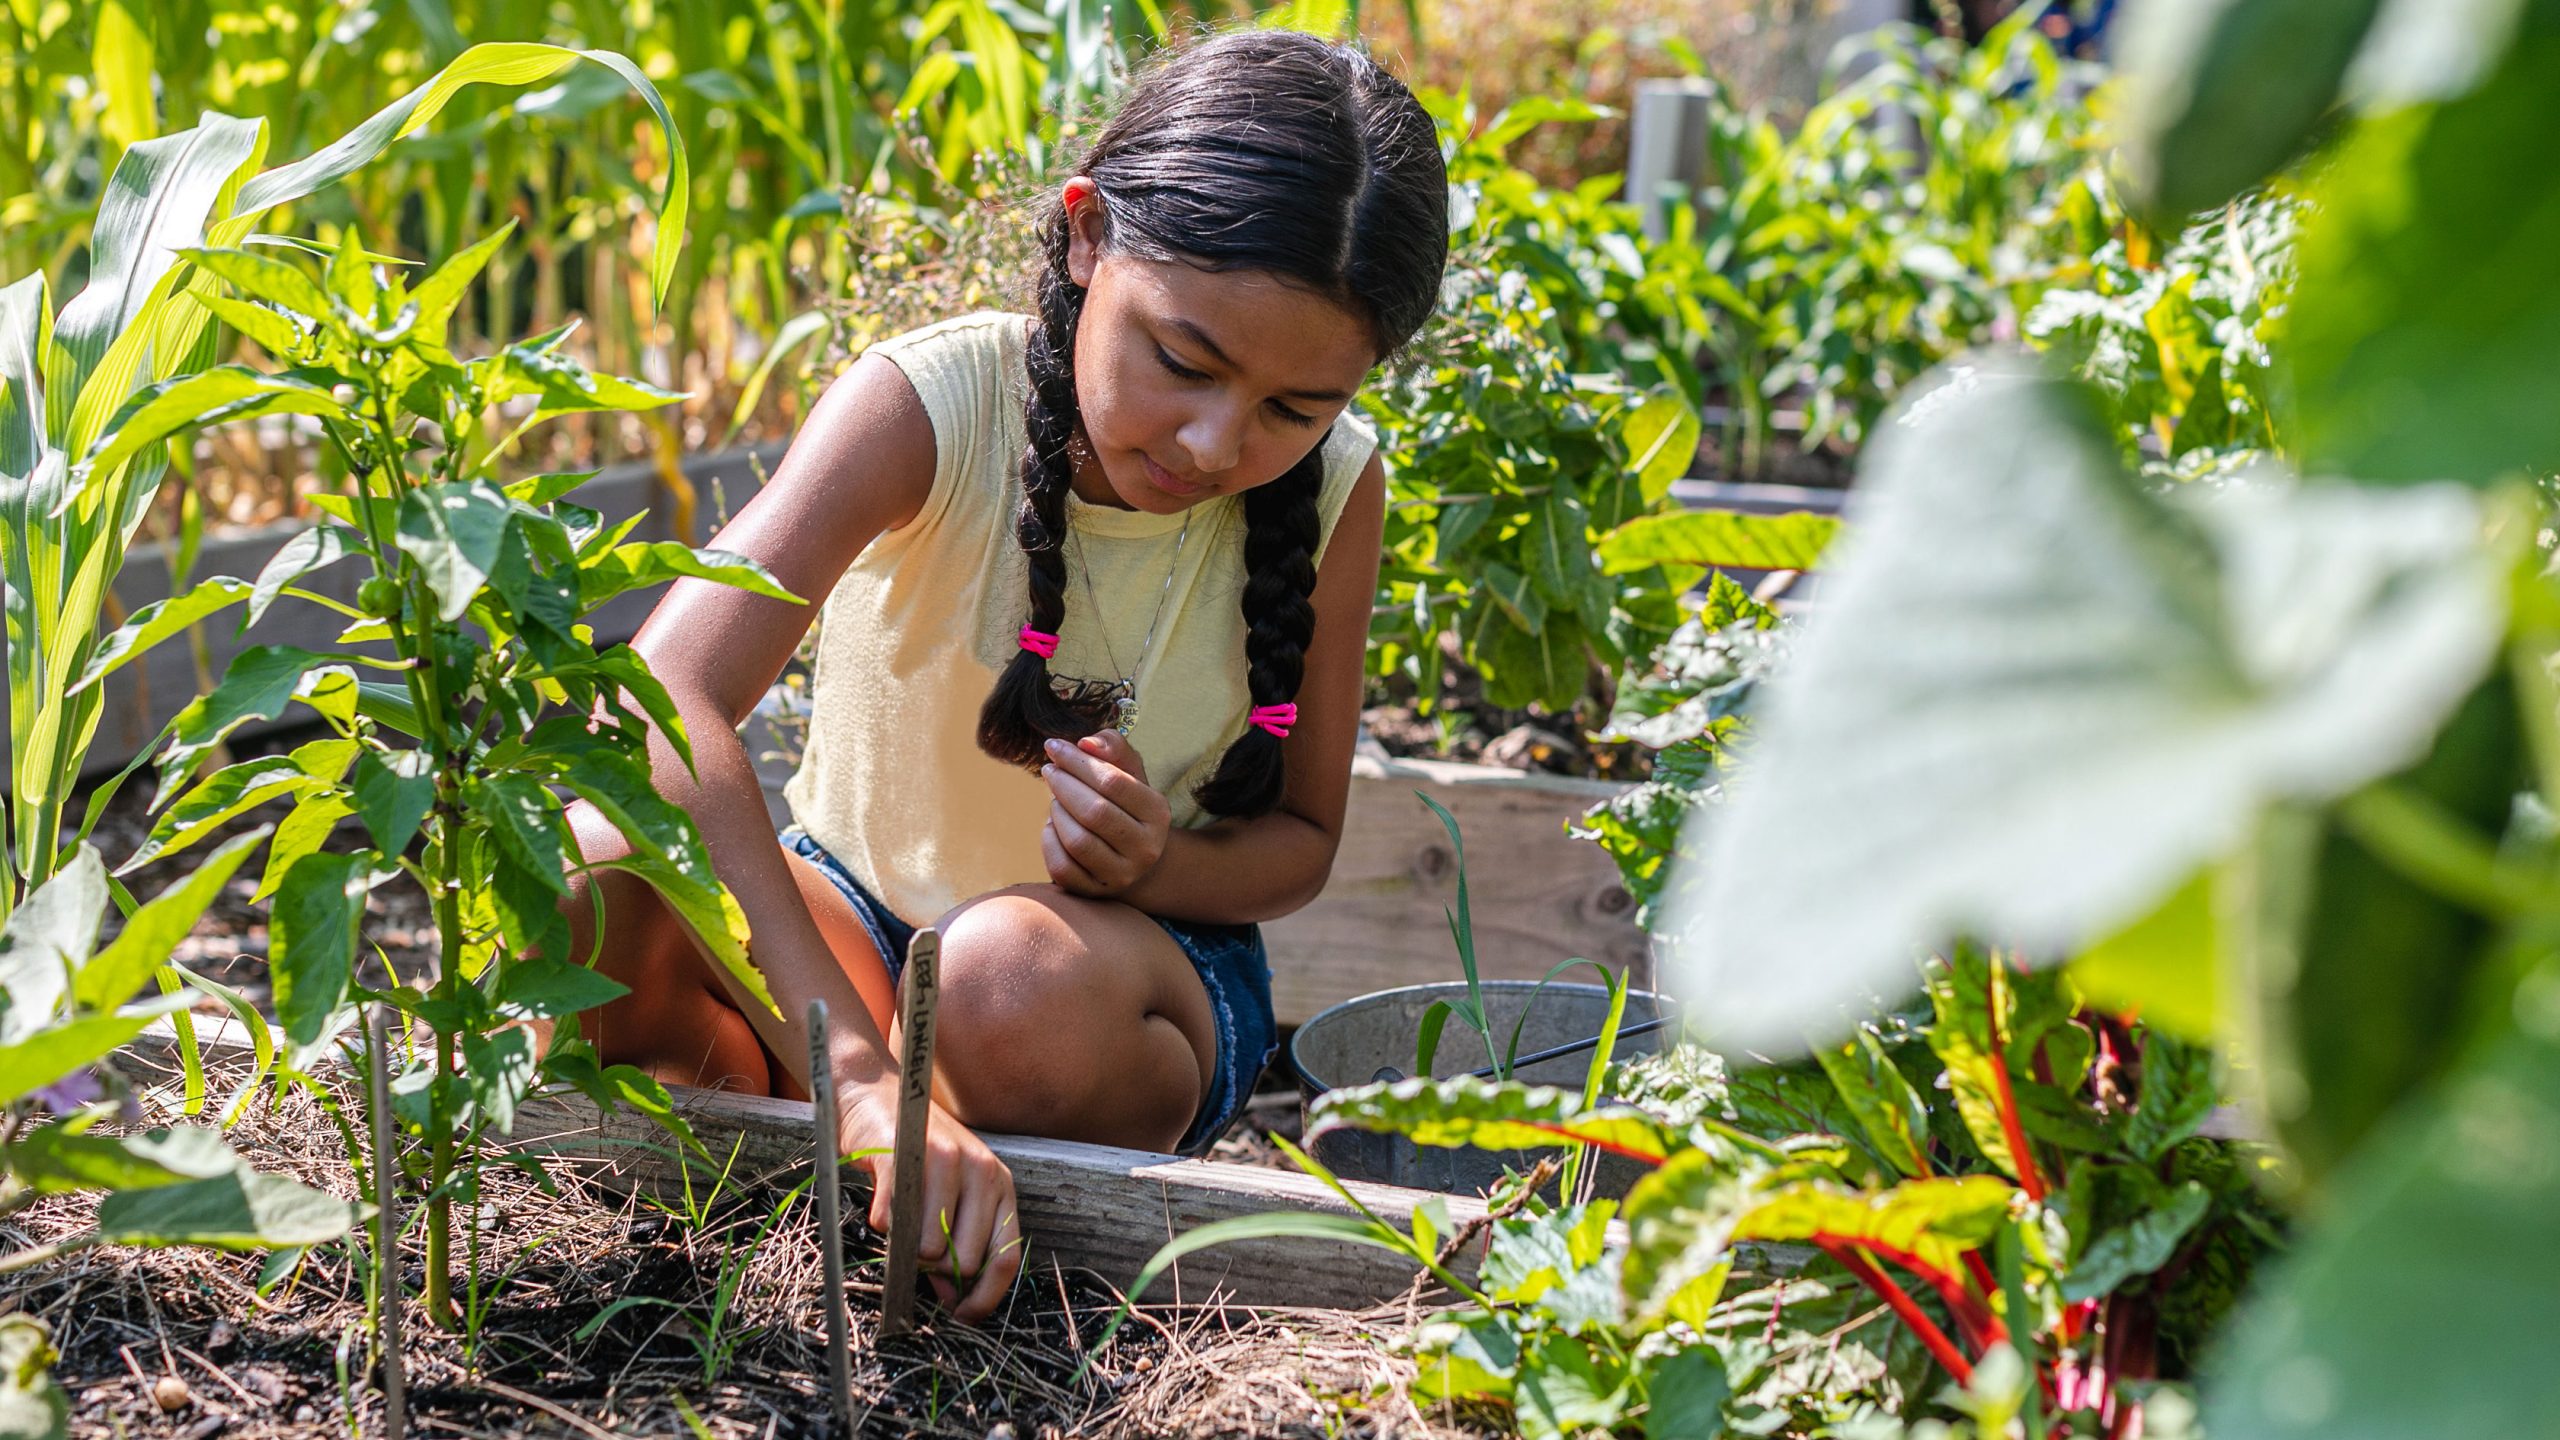 A girl with pigtails digs in a vegetable bed in the Edible Academy